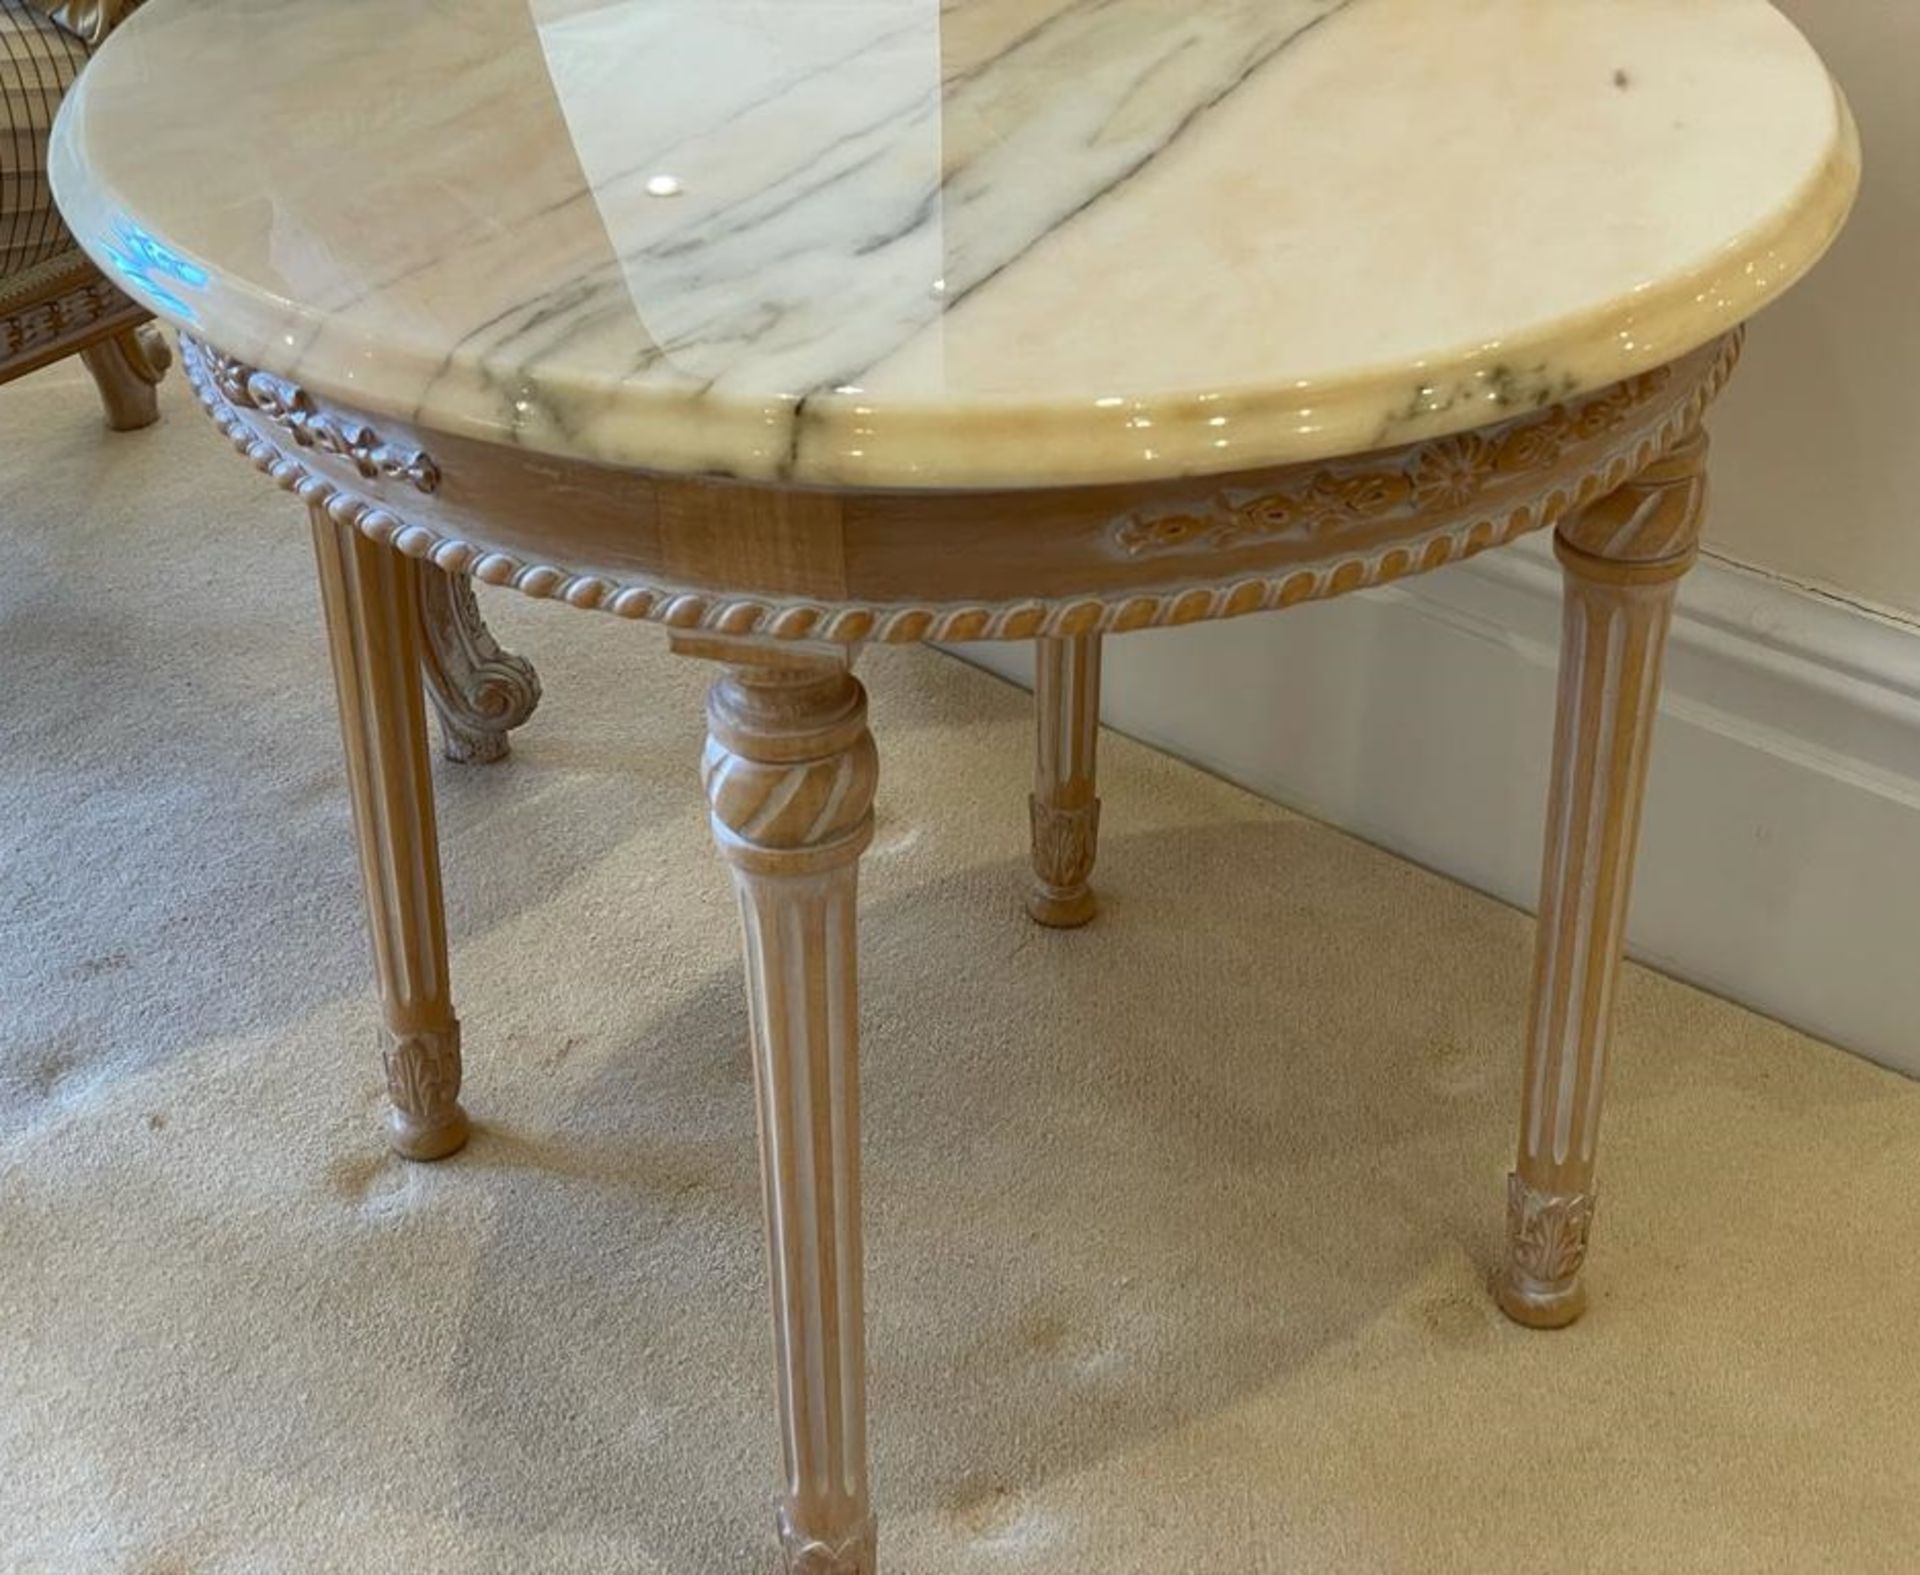 2 x French Shabby Chic Round Lamp Tables With Marble Top and Ornate Carved Base - Size: H50 x W60 - Image 4 of 8